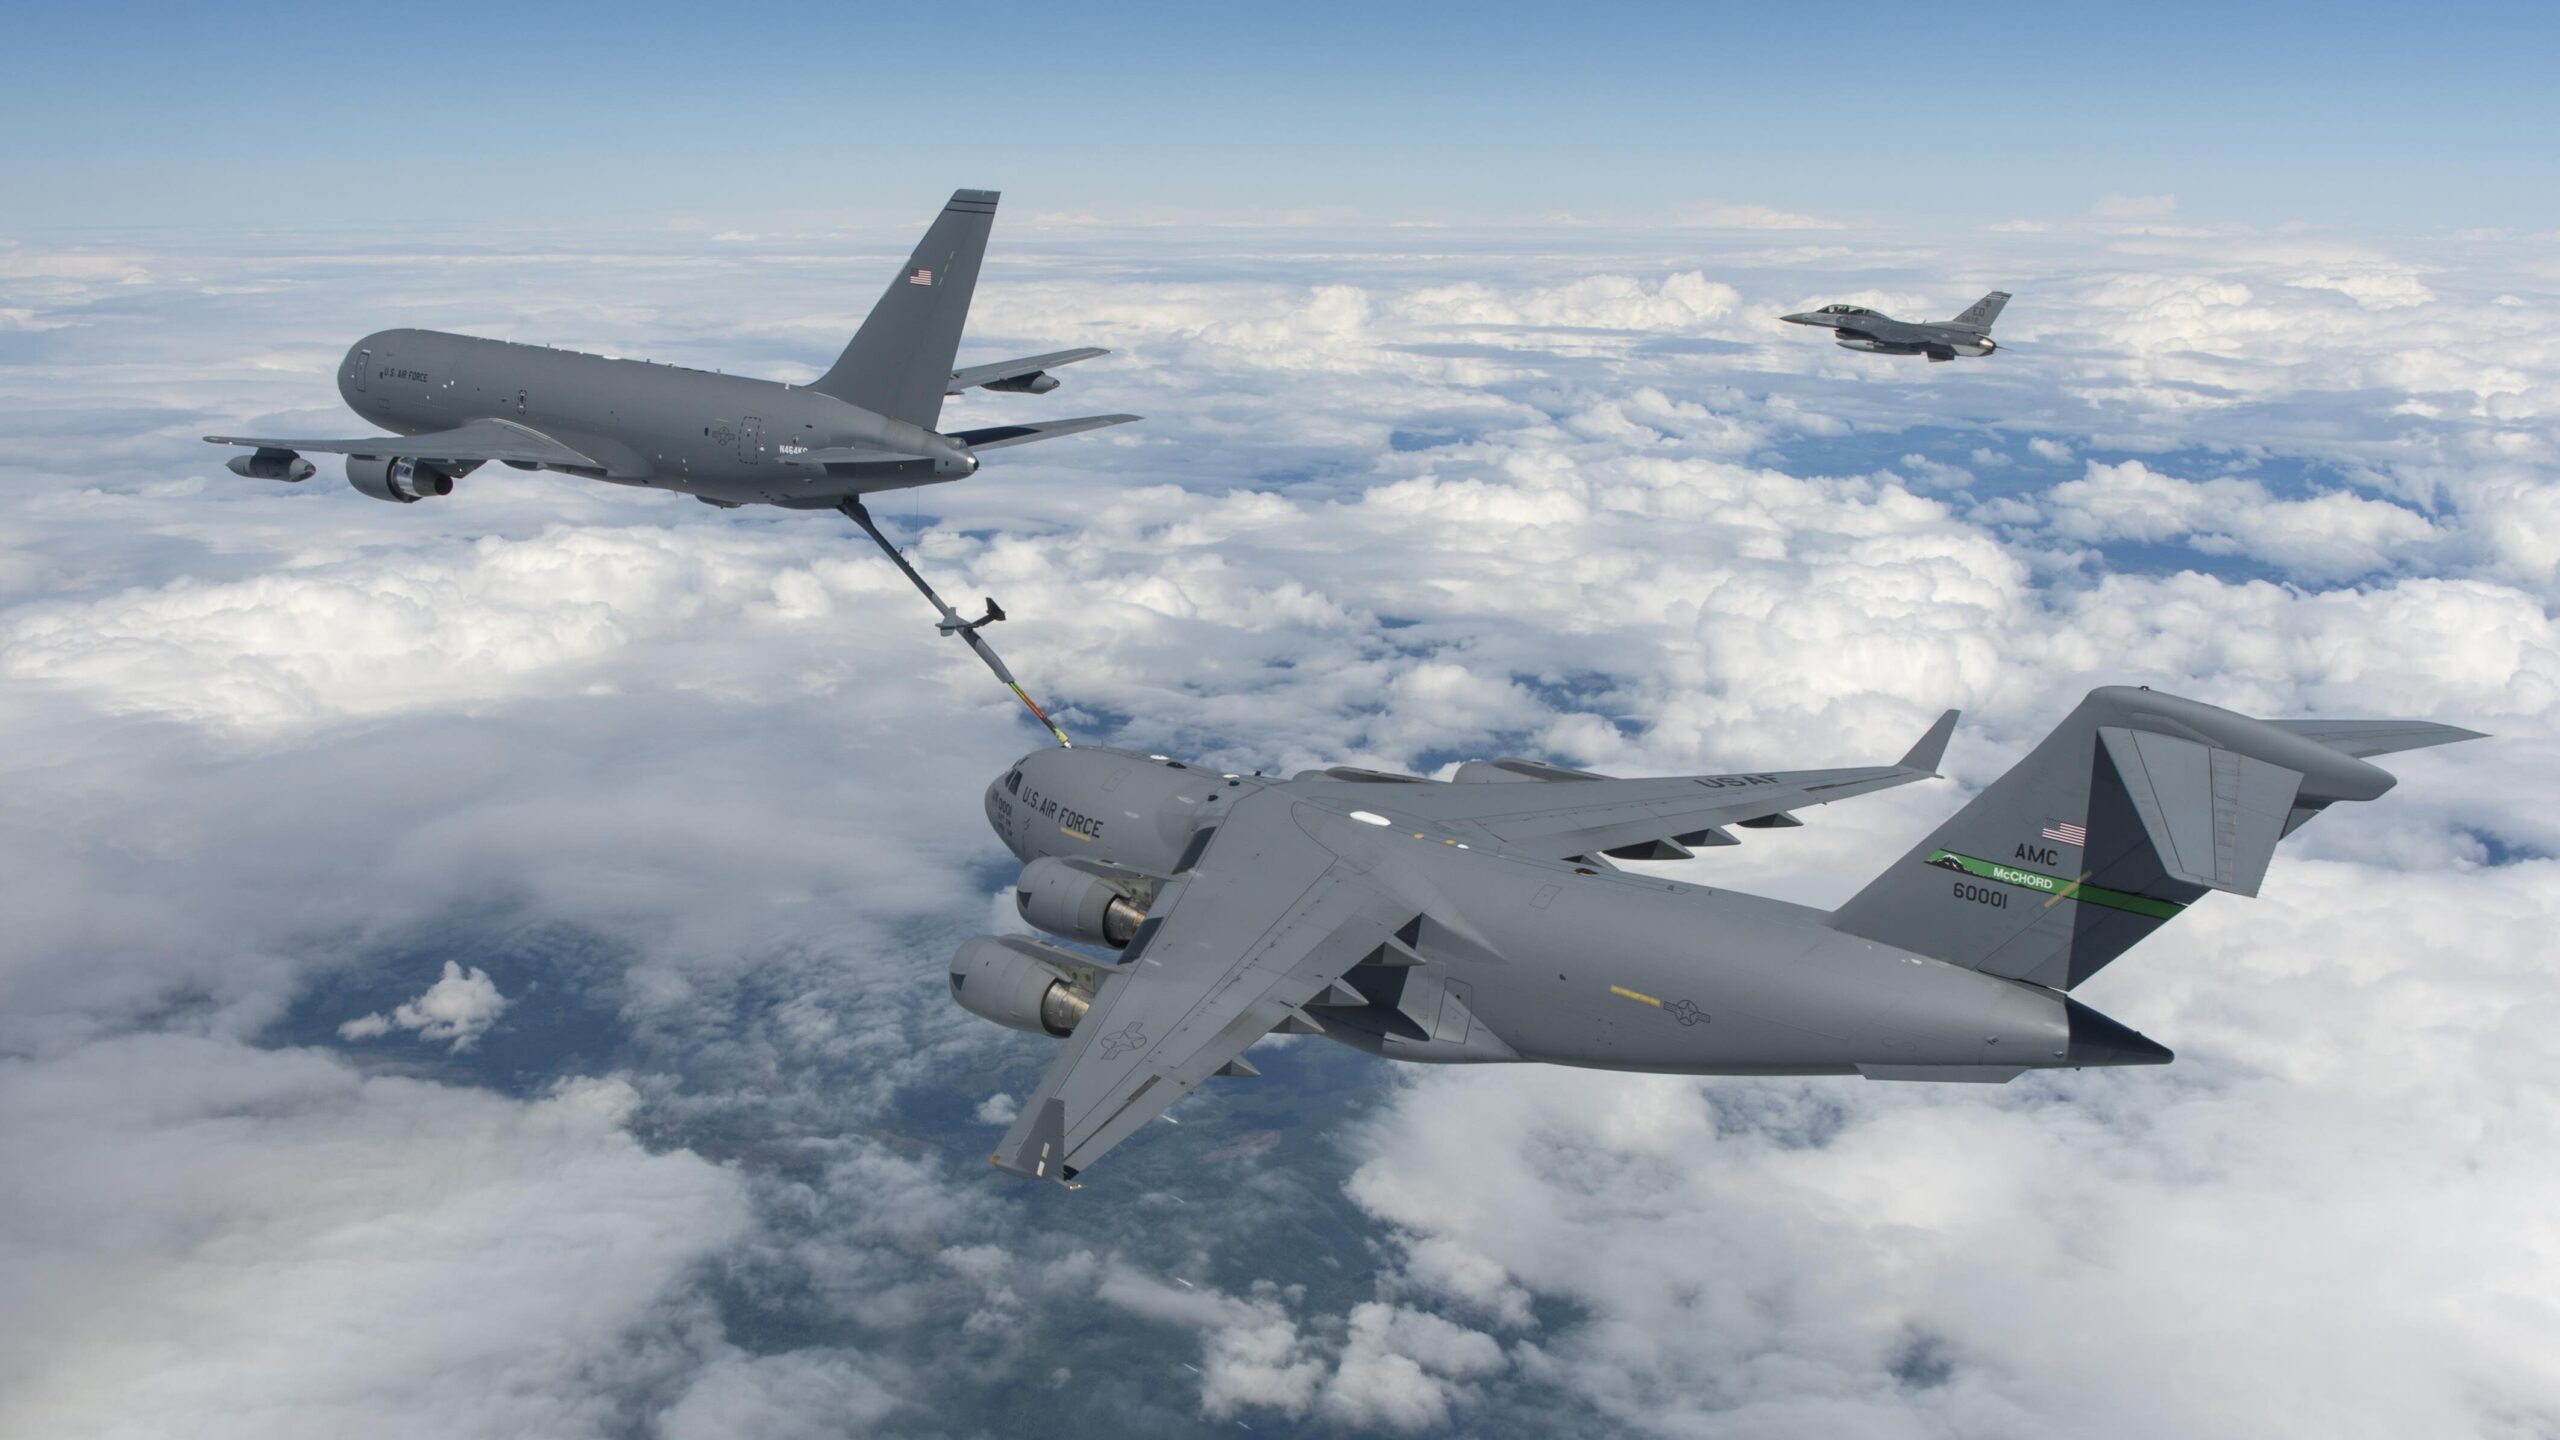 Years Late, It’s ‘Pass-Fail’ Now For Boeing’s KC-46 Tanker: Gen. Miller